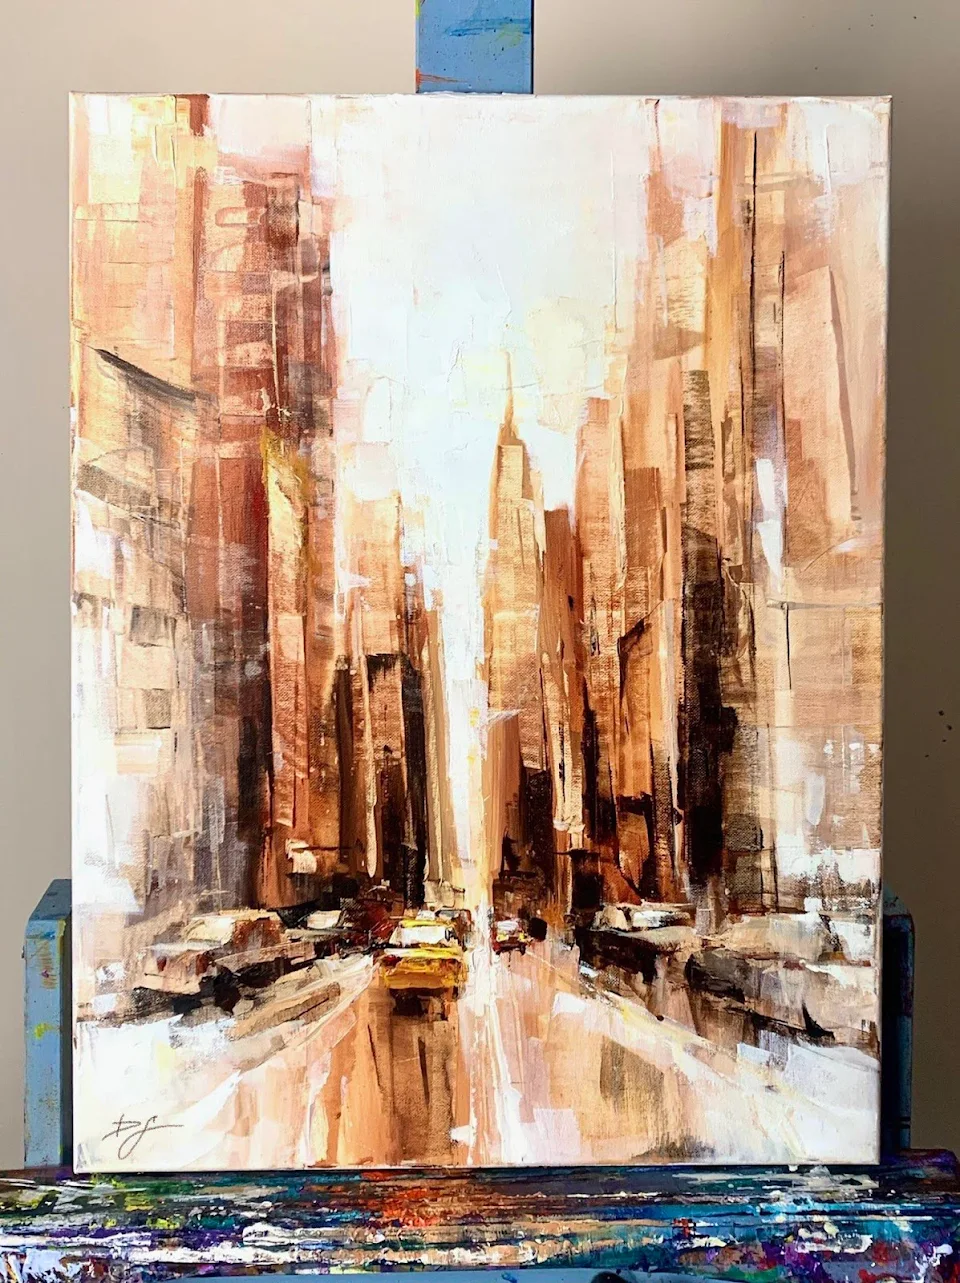 Challenging myself to paint a cityscape a day - just finished day 5!